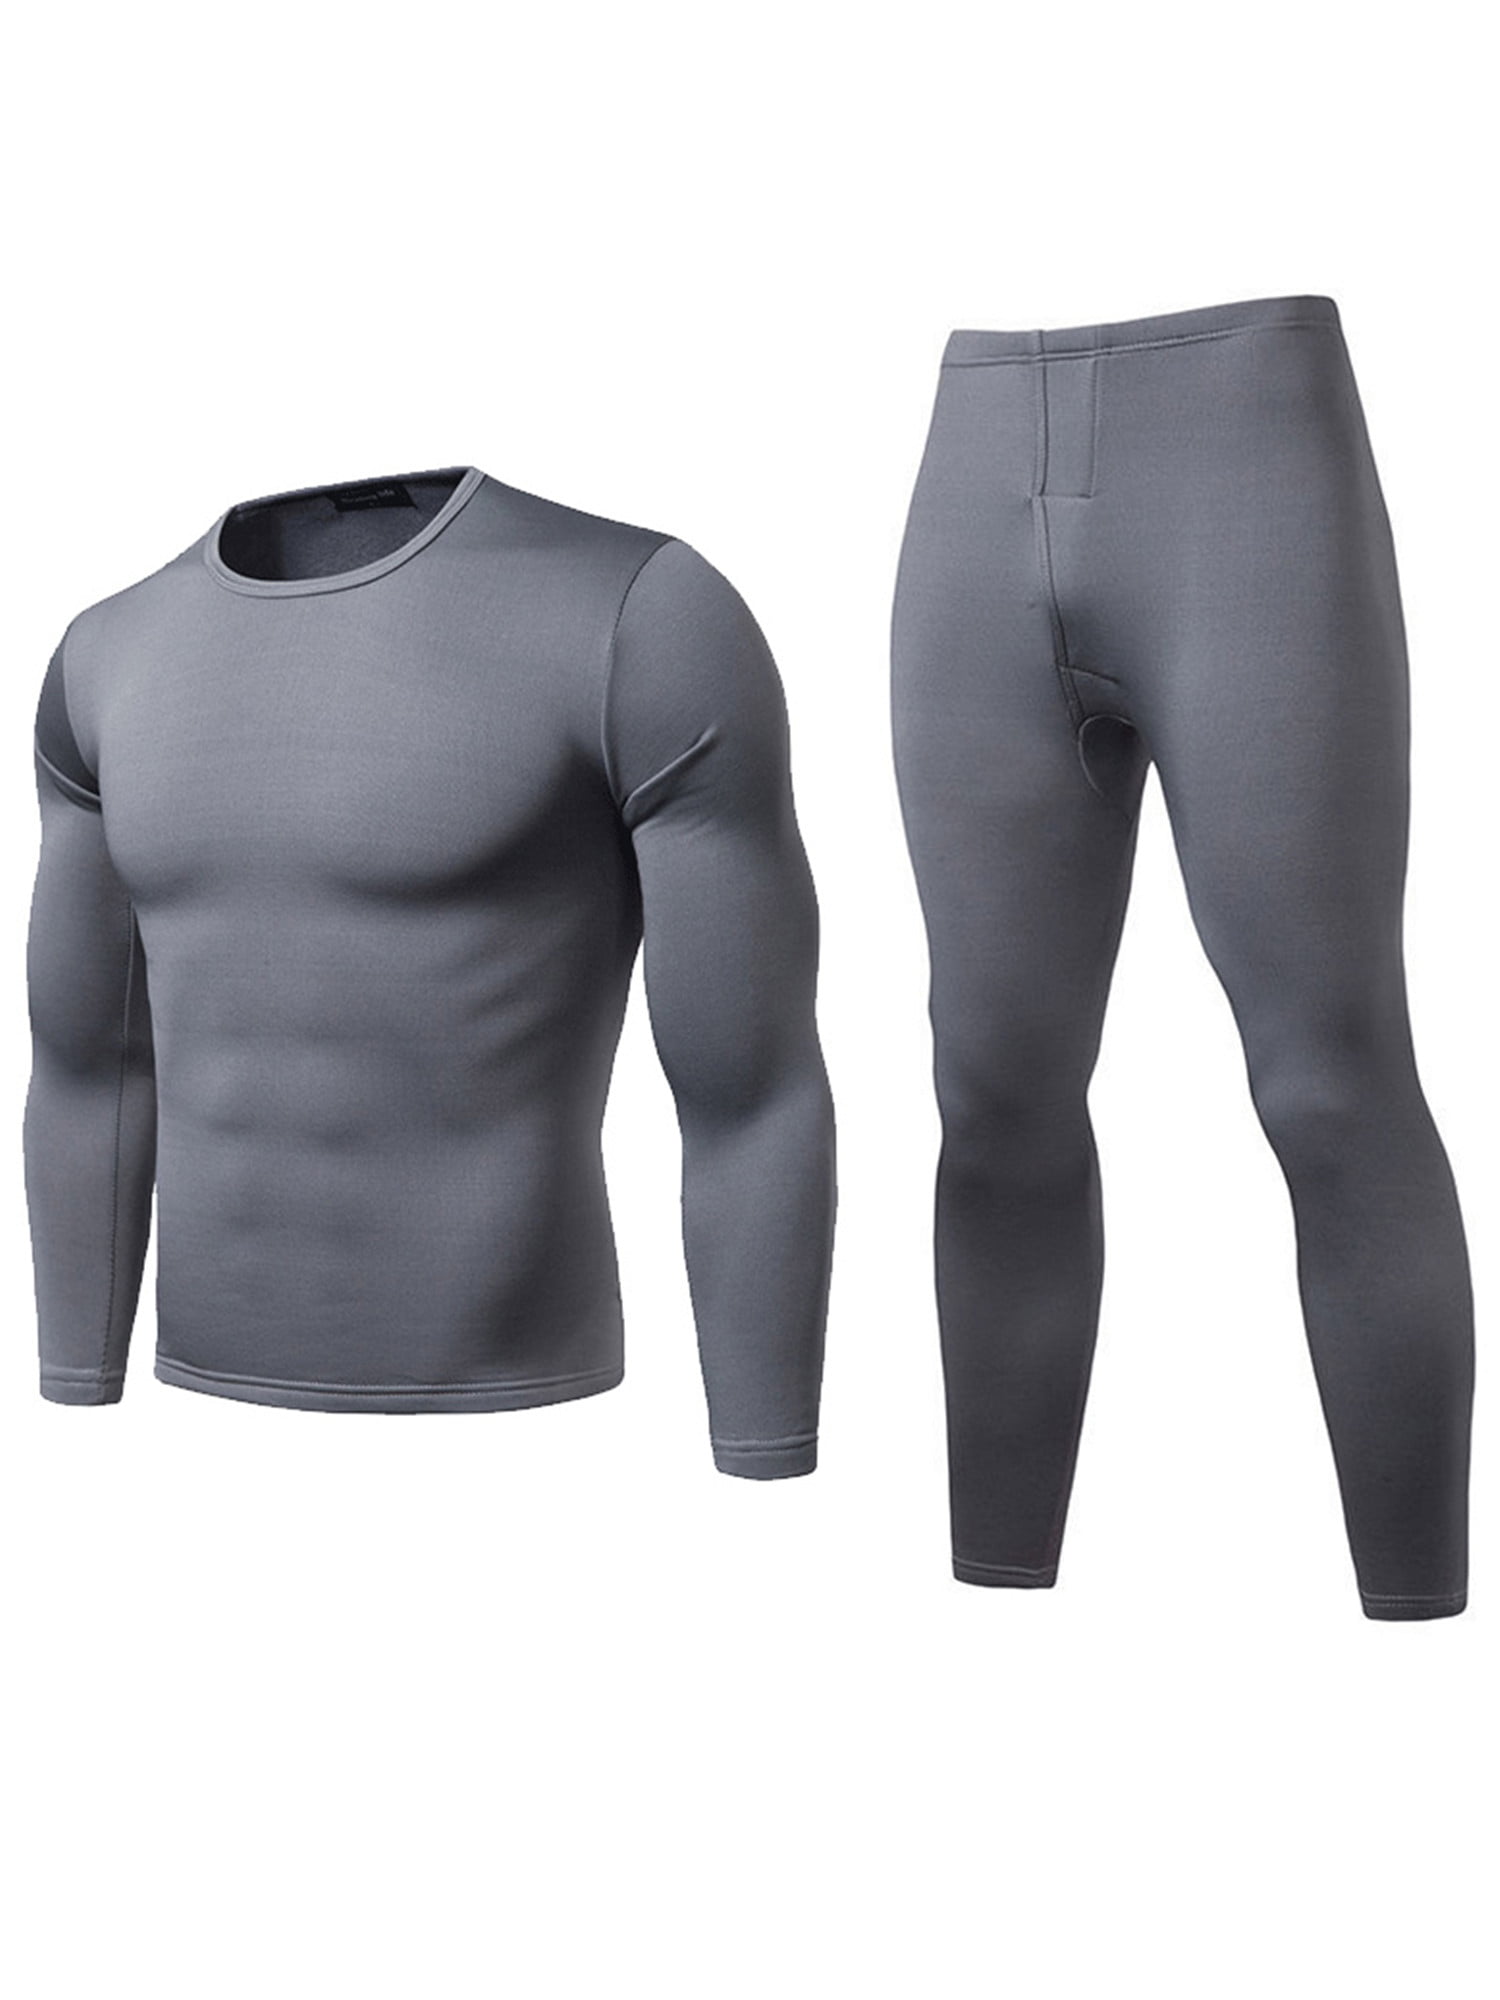 Mens Thermals Winter Thermal Underwear Set Long Johns for Men Warm Long Sleeve Top & Thermal Leggings for Skiing Cycling 